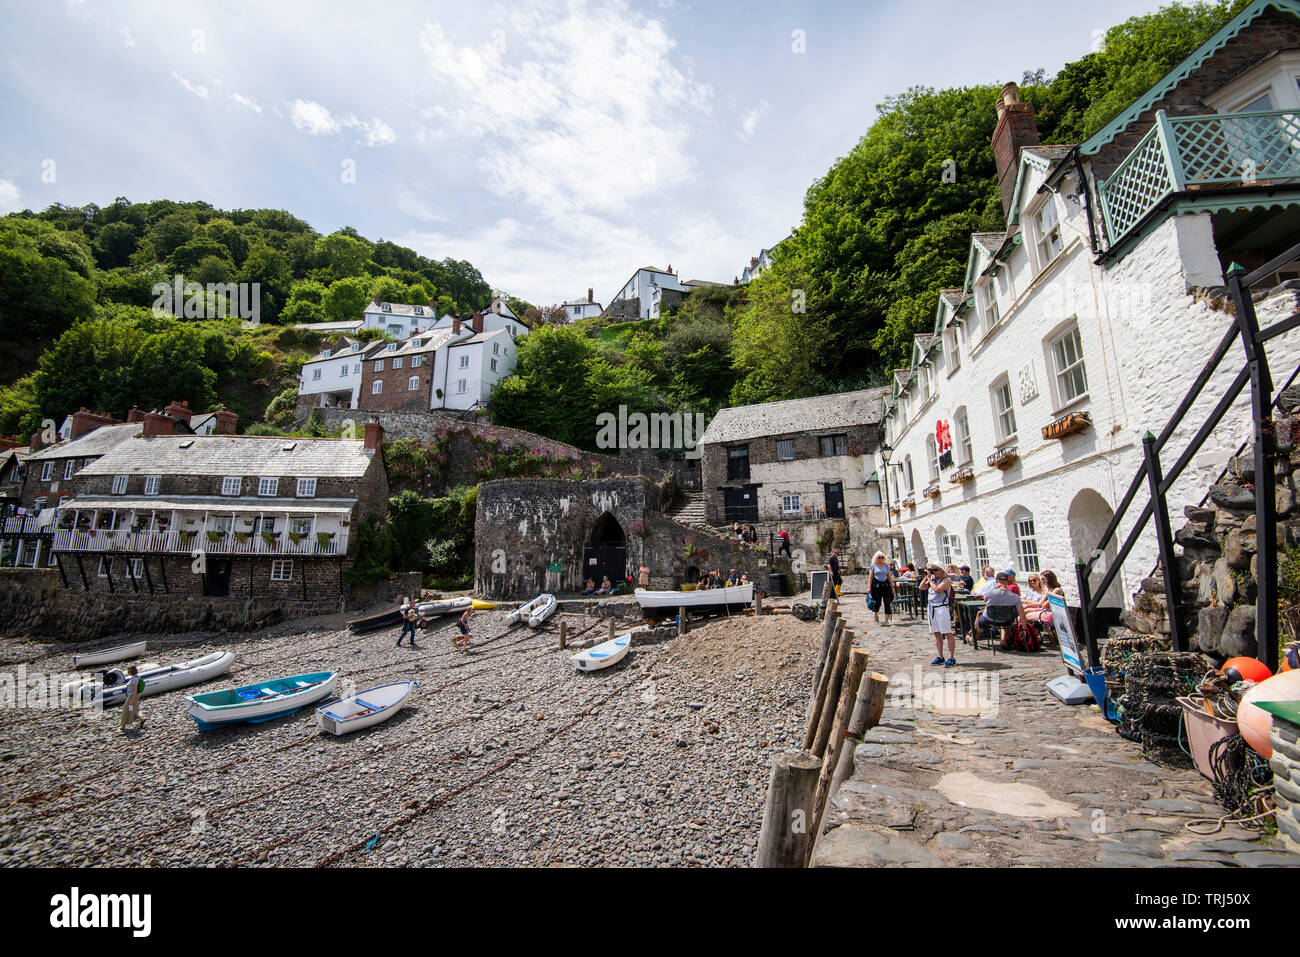 The beach and Harbour at Clovelly, Devon England UK Stock Photo